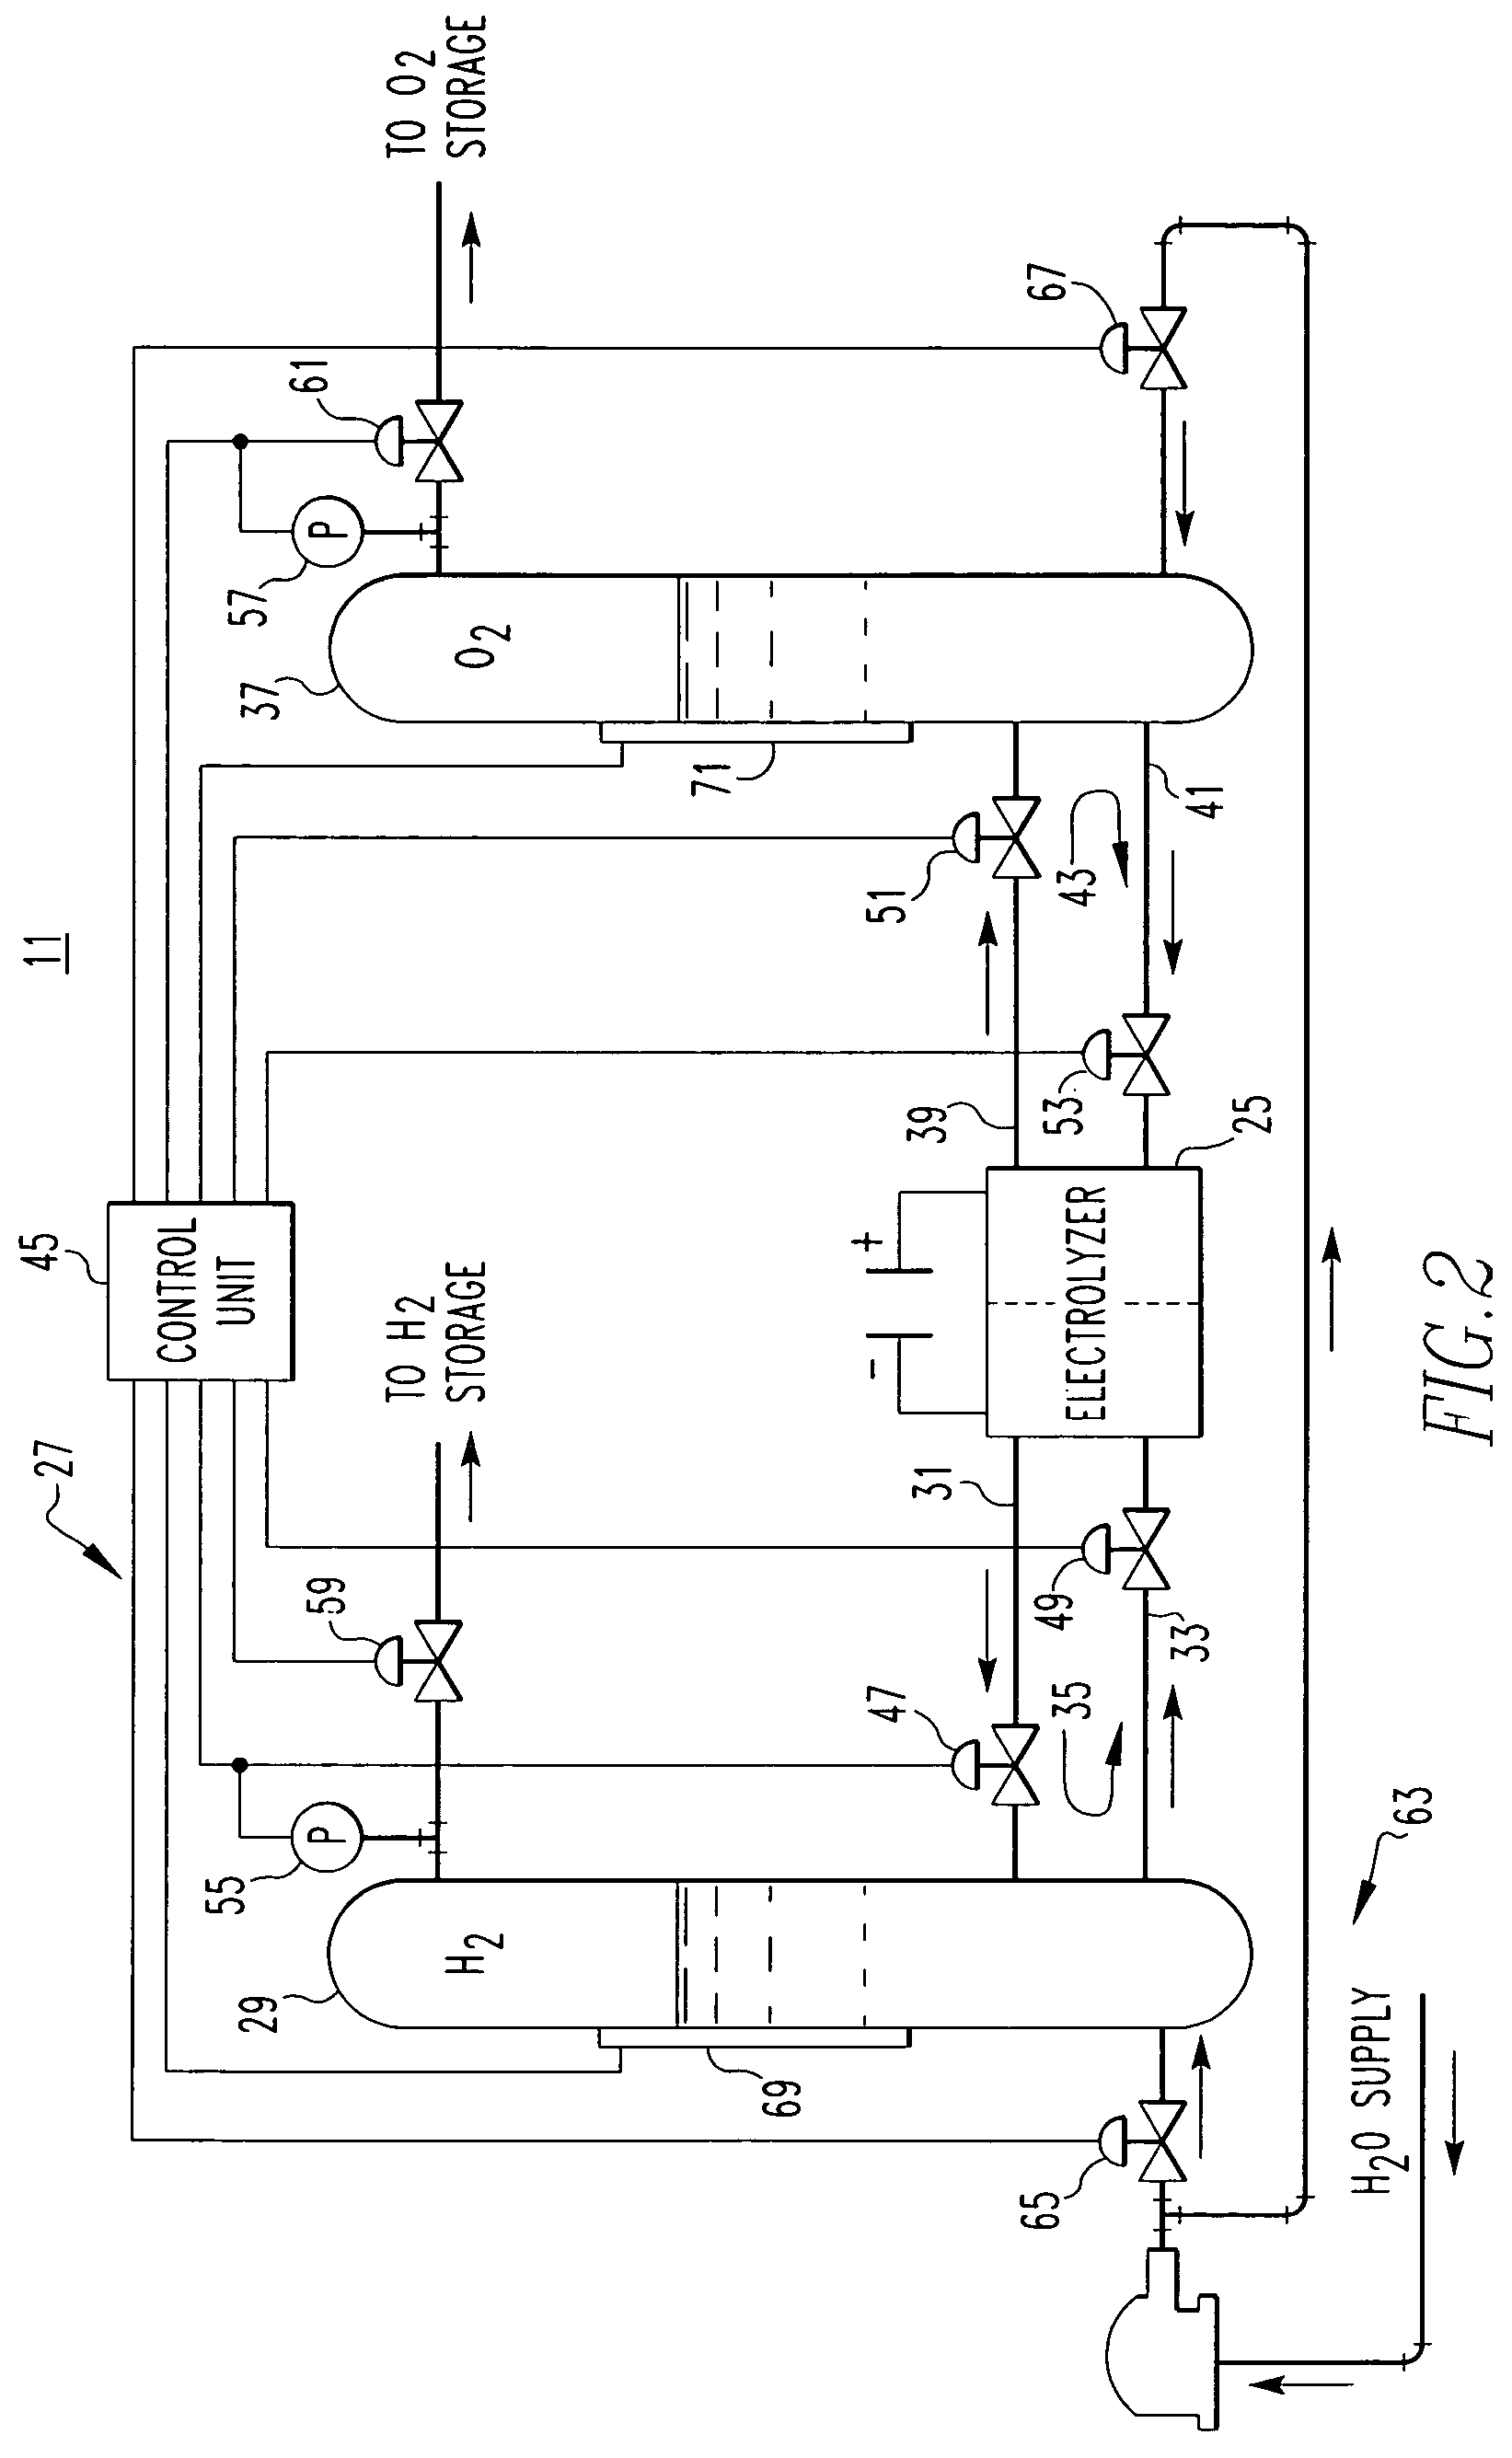 Hydrogen based energy storage apparatus and method